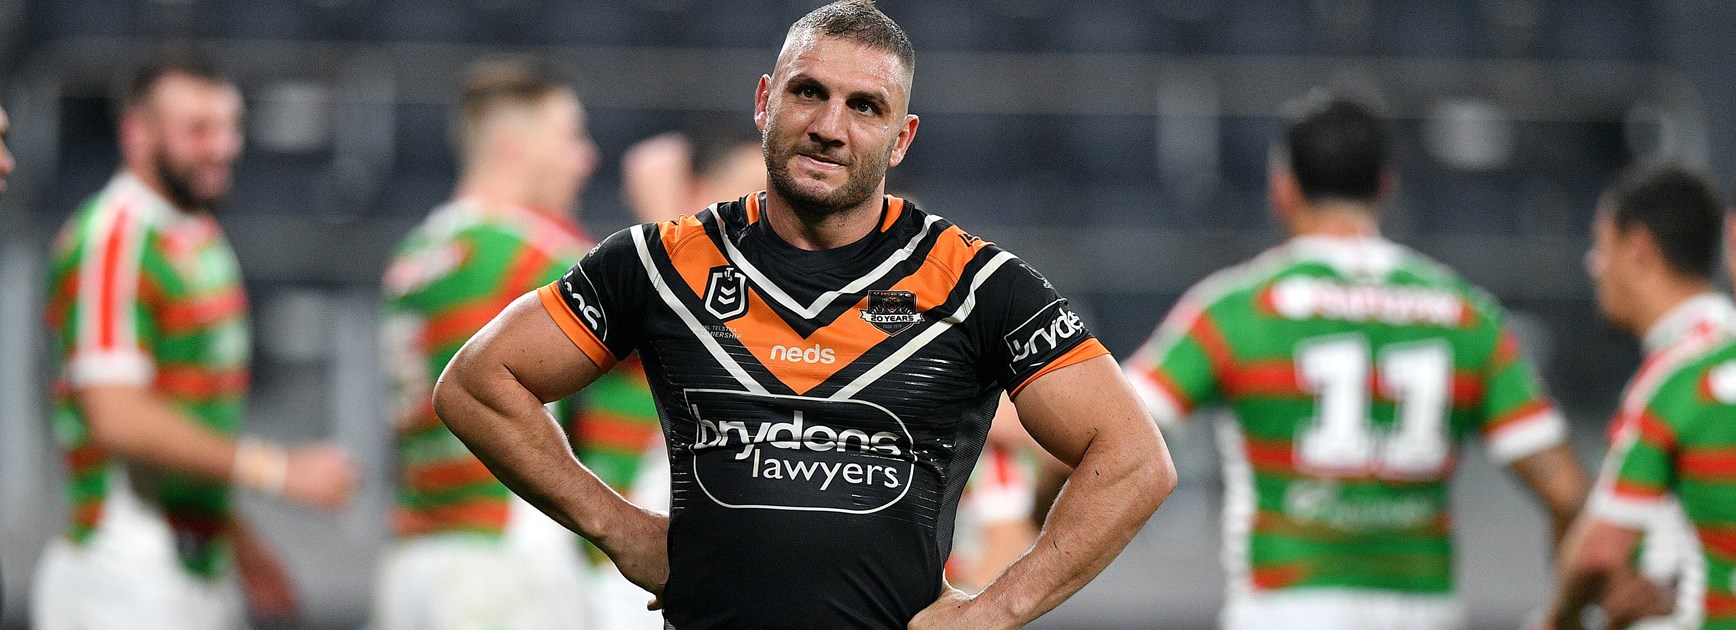 Apology accepted but Farah won't defend ex-teammate Burgess